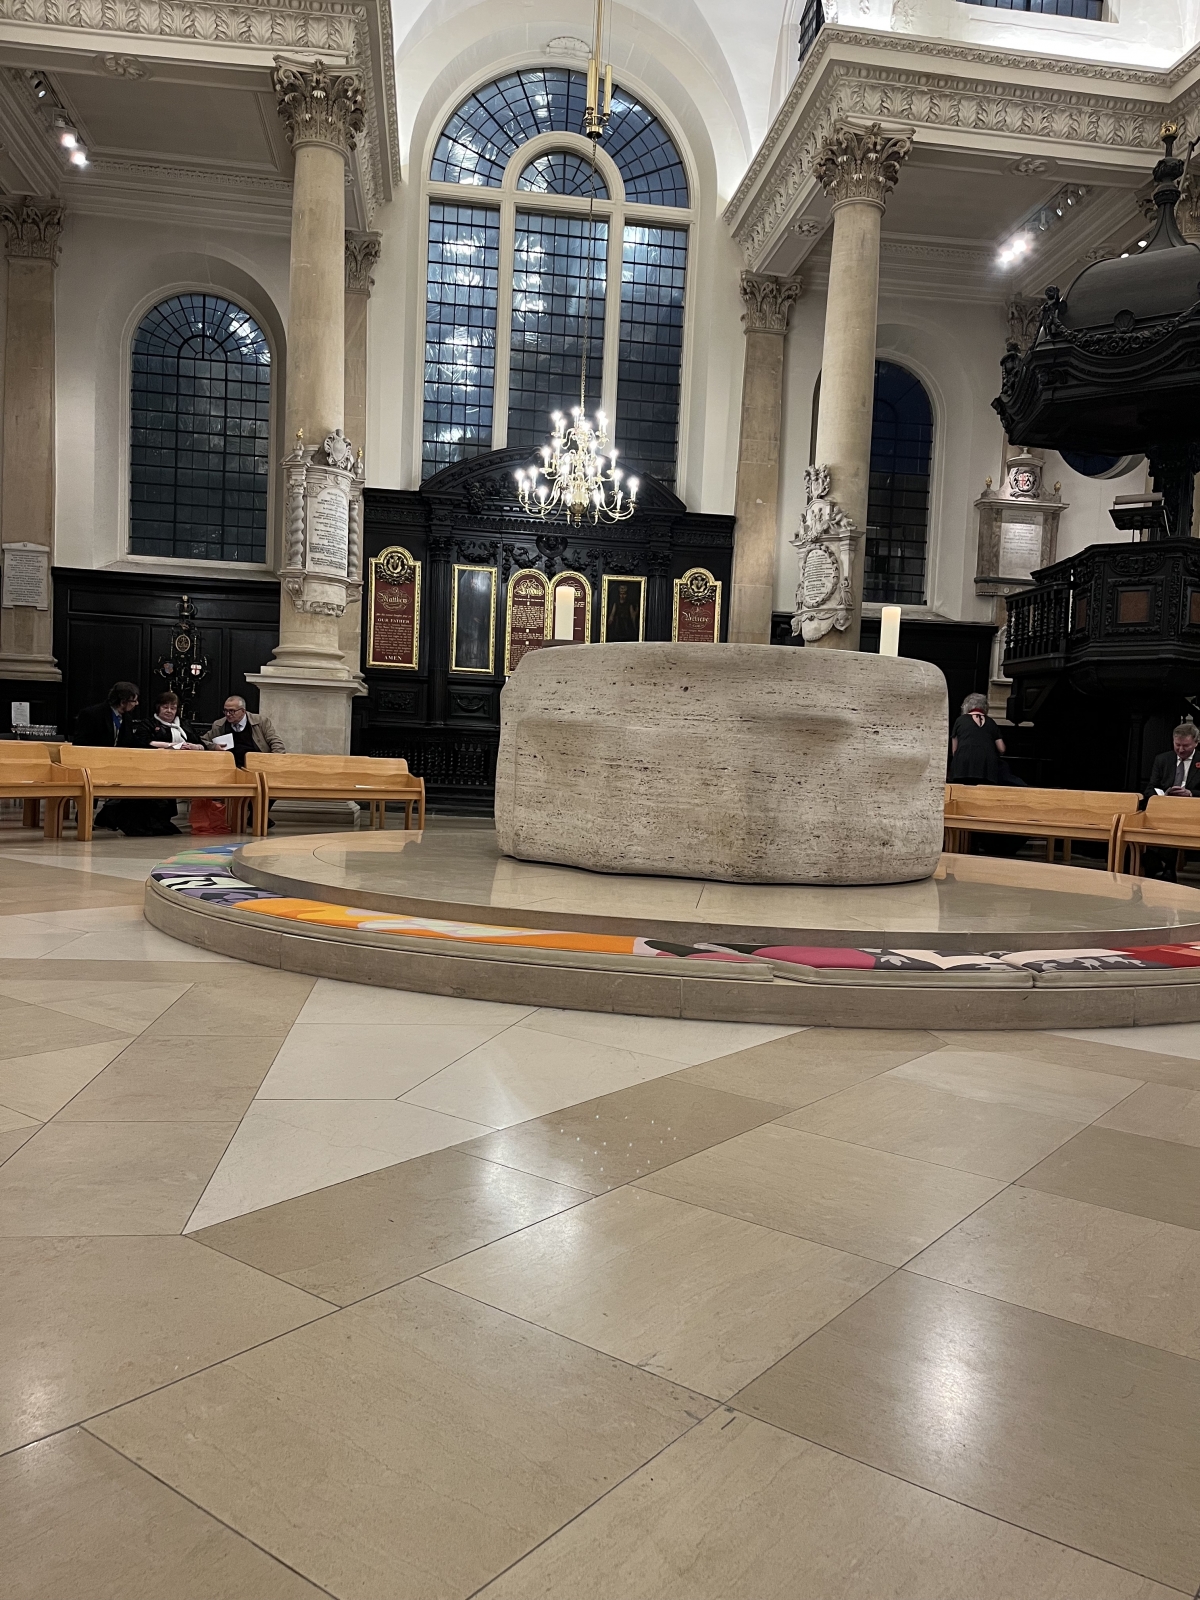 Thanksgiving Service for Lord Mayor St Stephen Walbrook